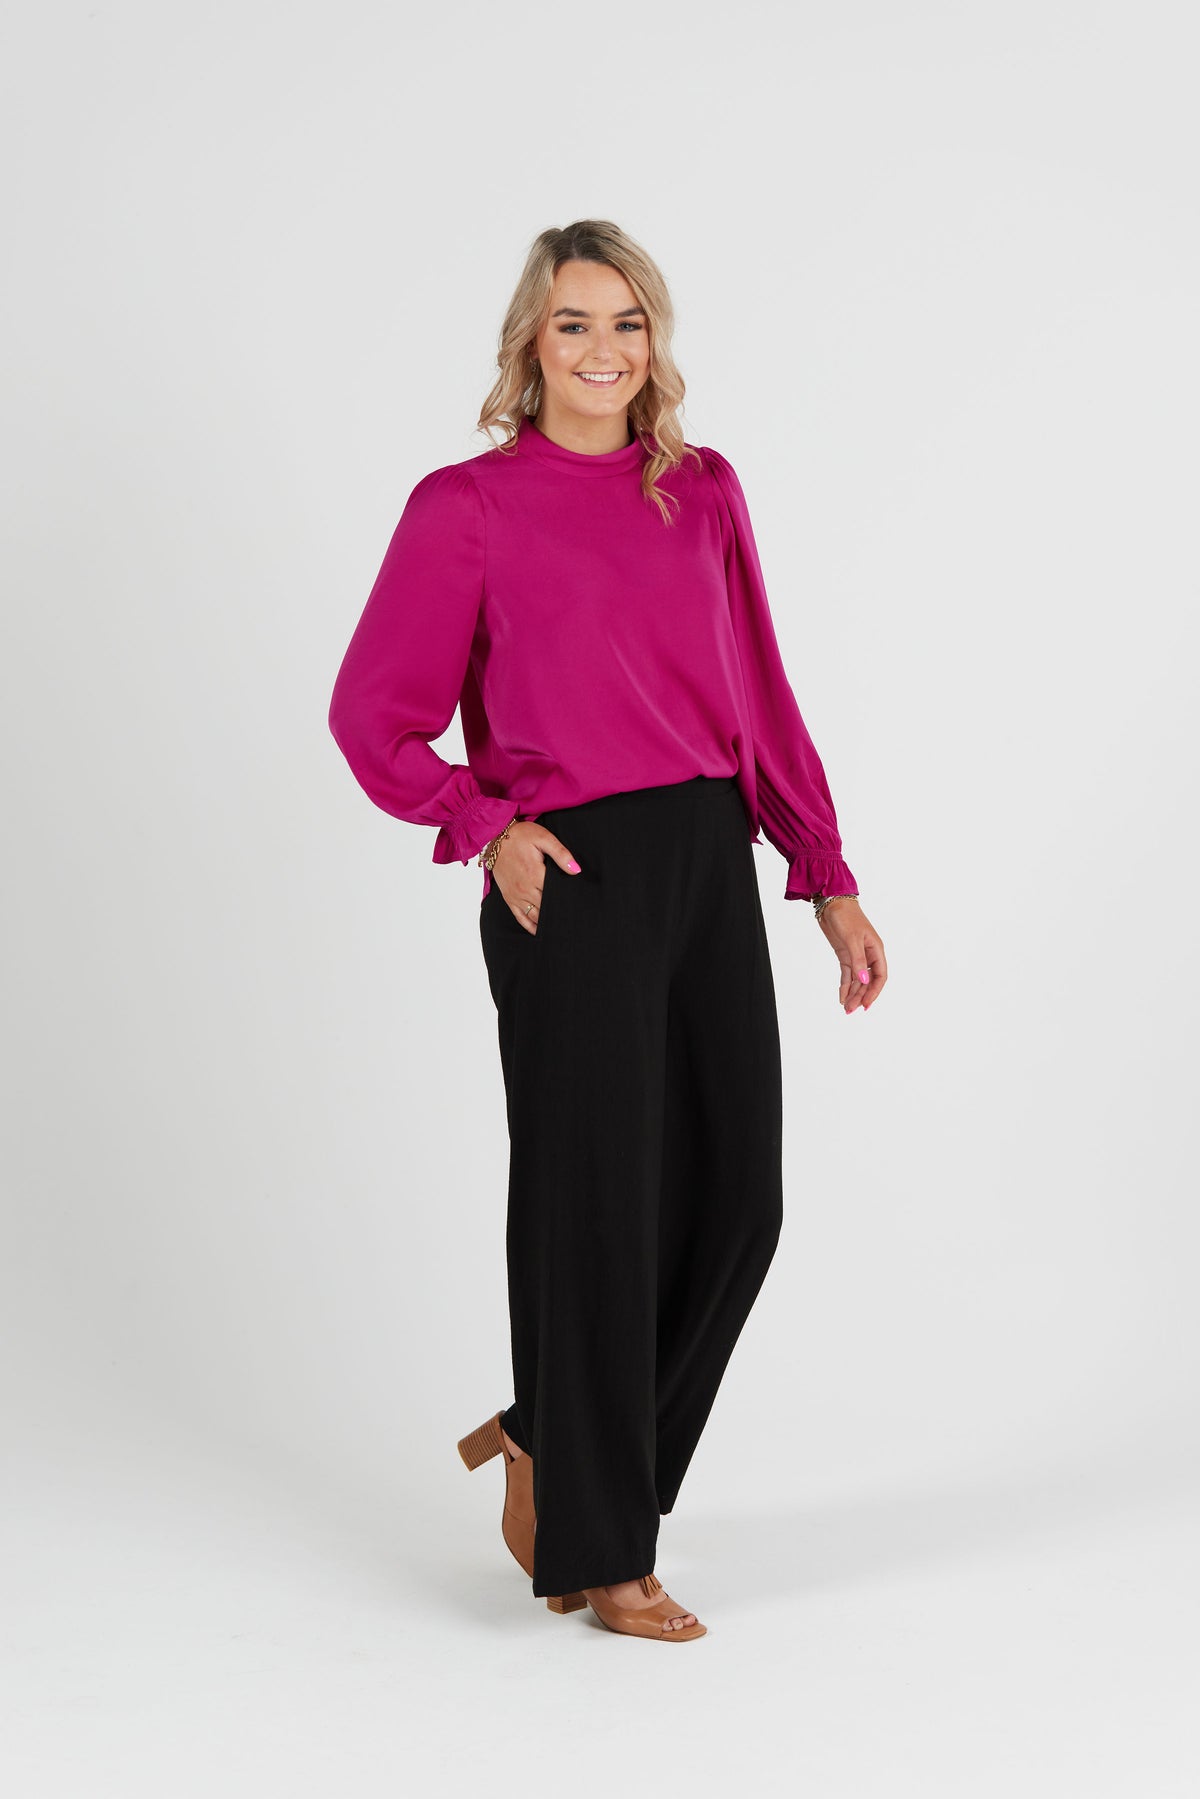 Importance Top Magenta Washer Satin - EXCLUSIVE TO MINT BOUTIQUE